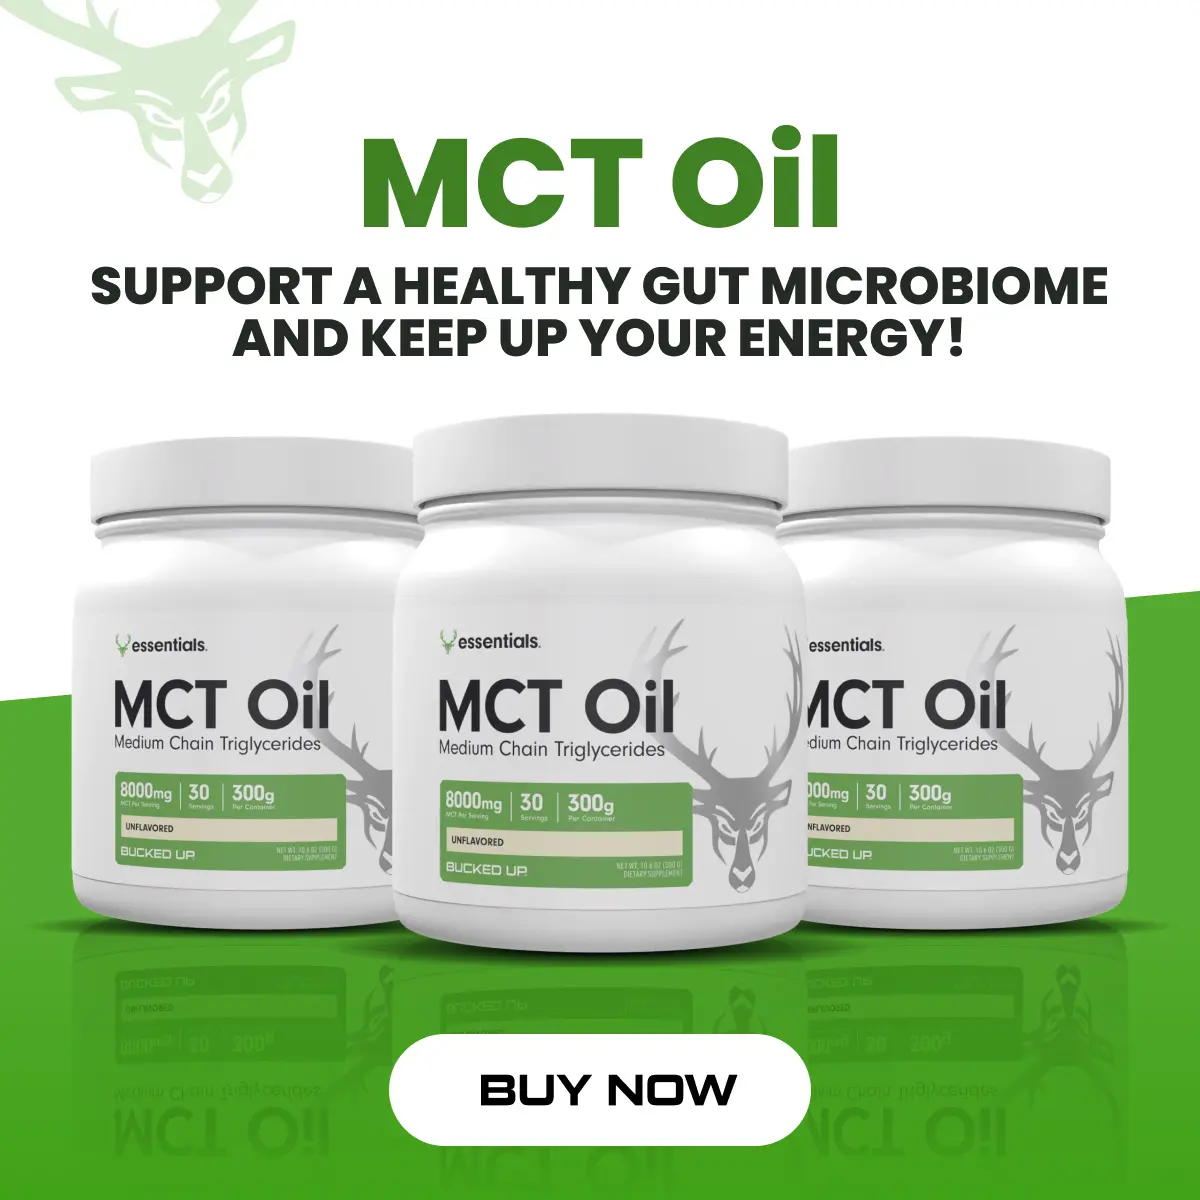 MCT Oil- text reads "MCT OIL support a healthy gut microbiome and keep up your energy" Button reads "BUY NOW" image is of 3 cans of MCT Oil on a green background